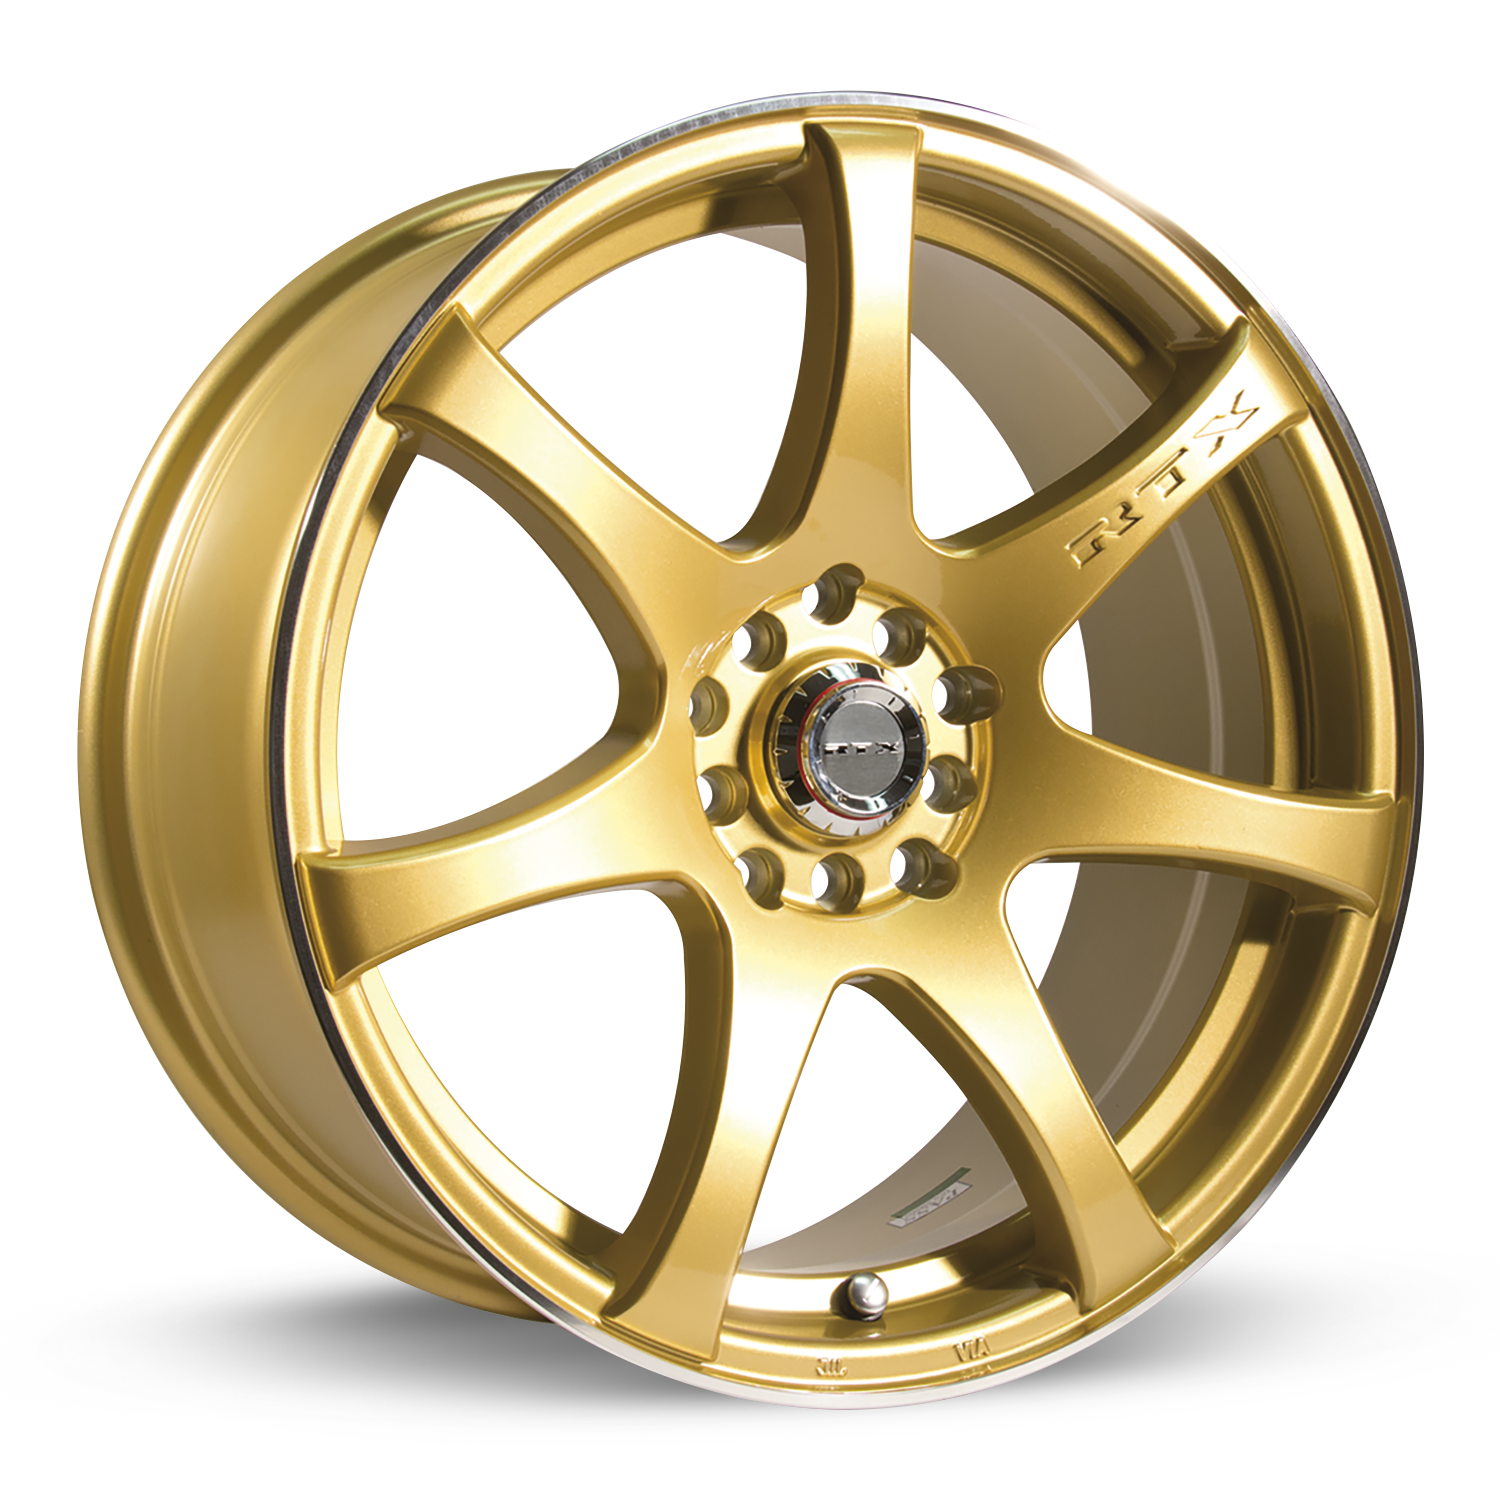 RTX INK GOLD WITH MACHINED WHEELS | 15X6.5 | 4X100/114.3 | OFFSET: 40MM | CB: 73.1MM